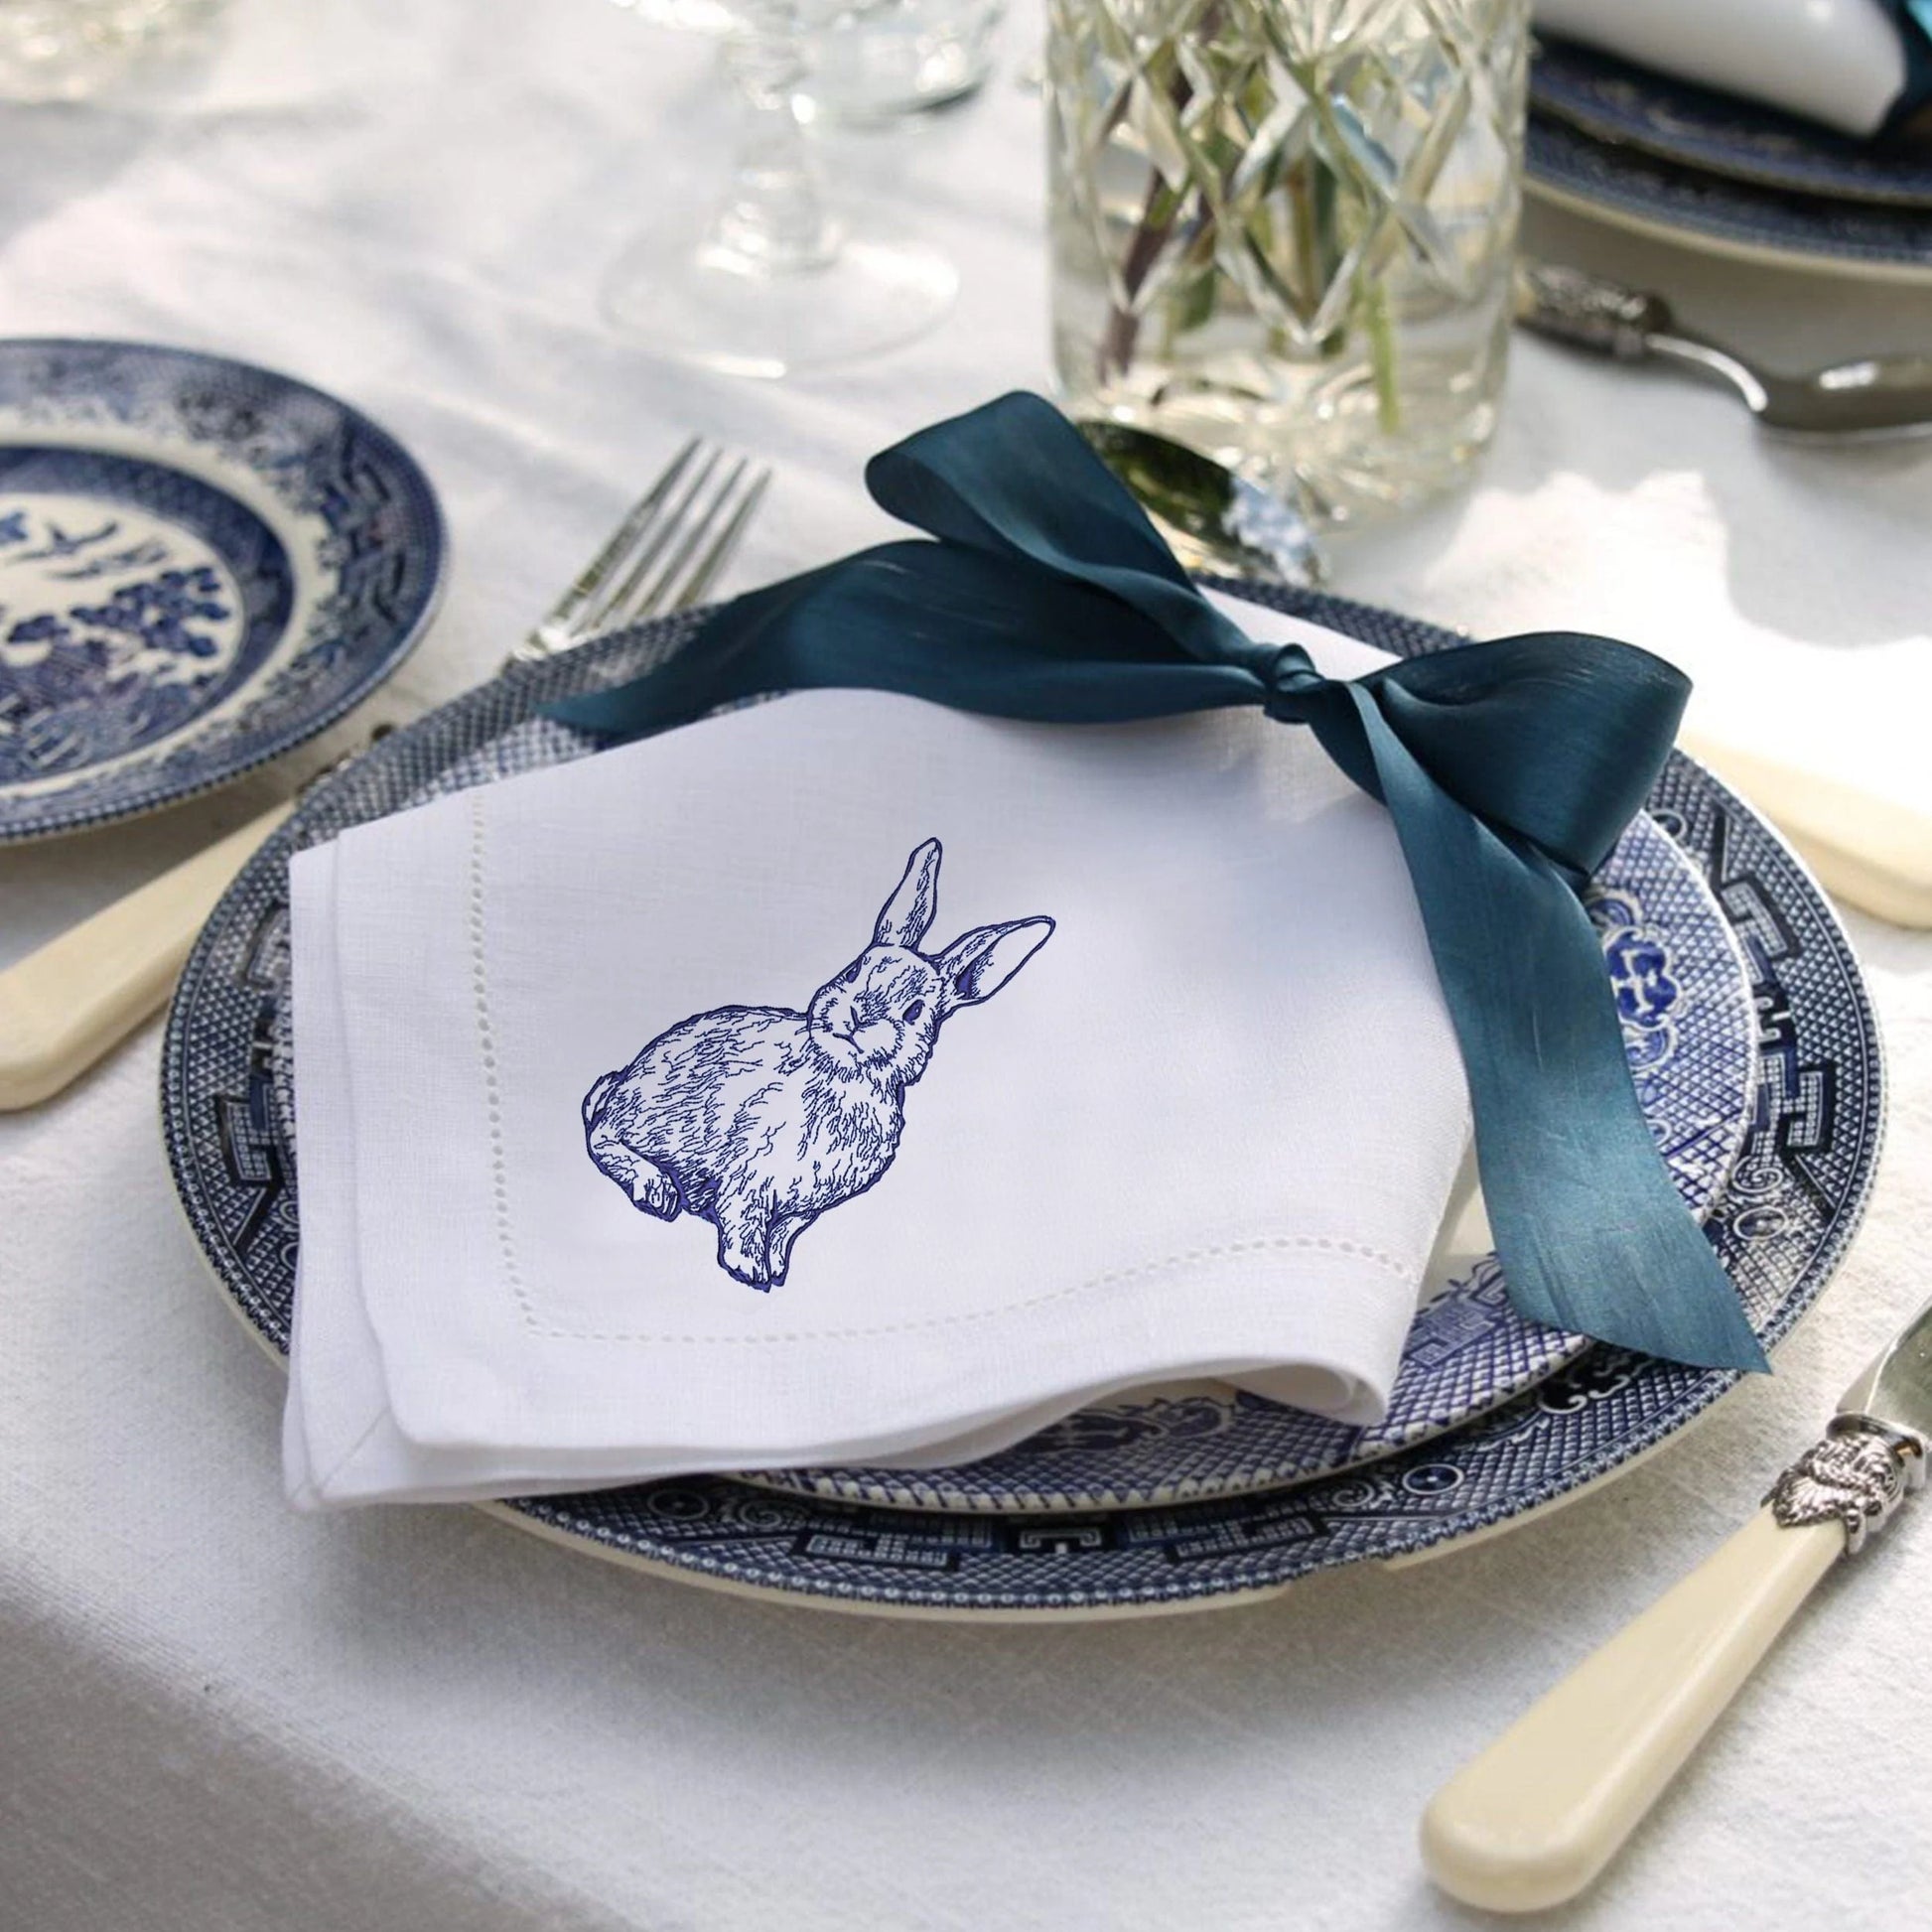 Rabbit Machine Embroidery Design on Chinoiserie style table napkin